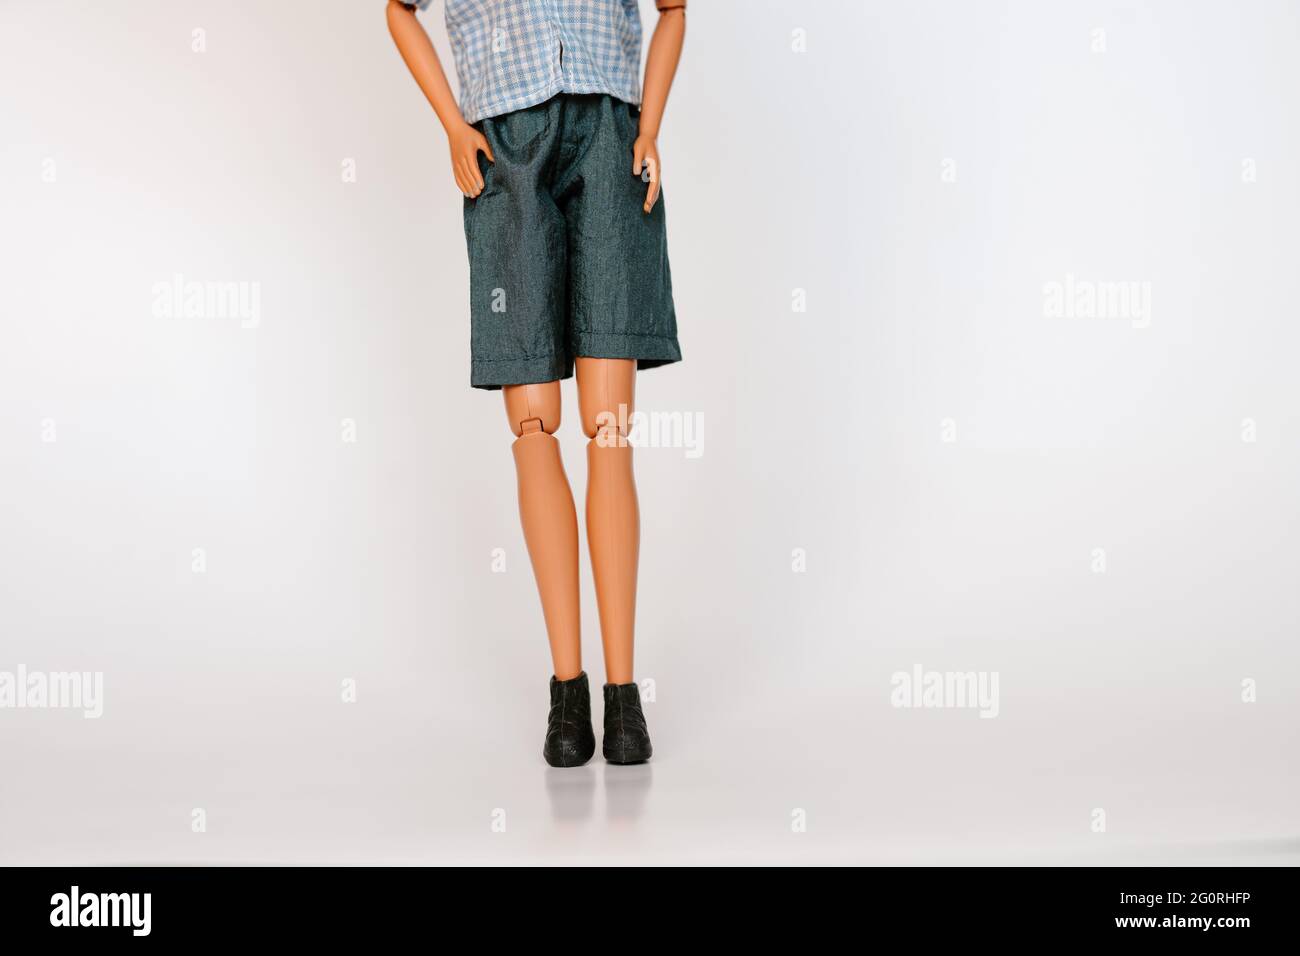 Tom boy doll on white background front view. Gender fluid non-binary concept Stock Photo